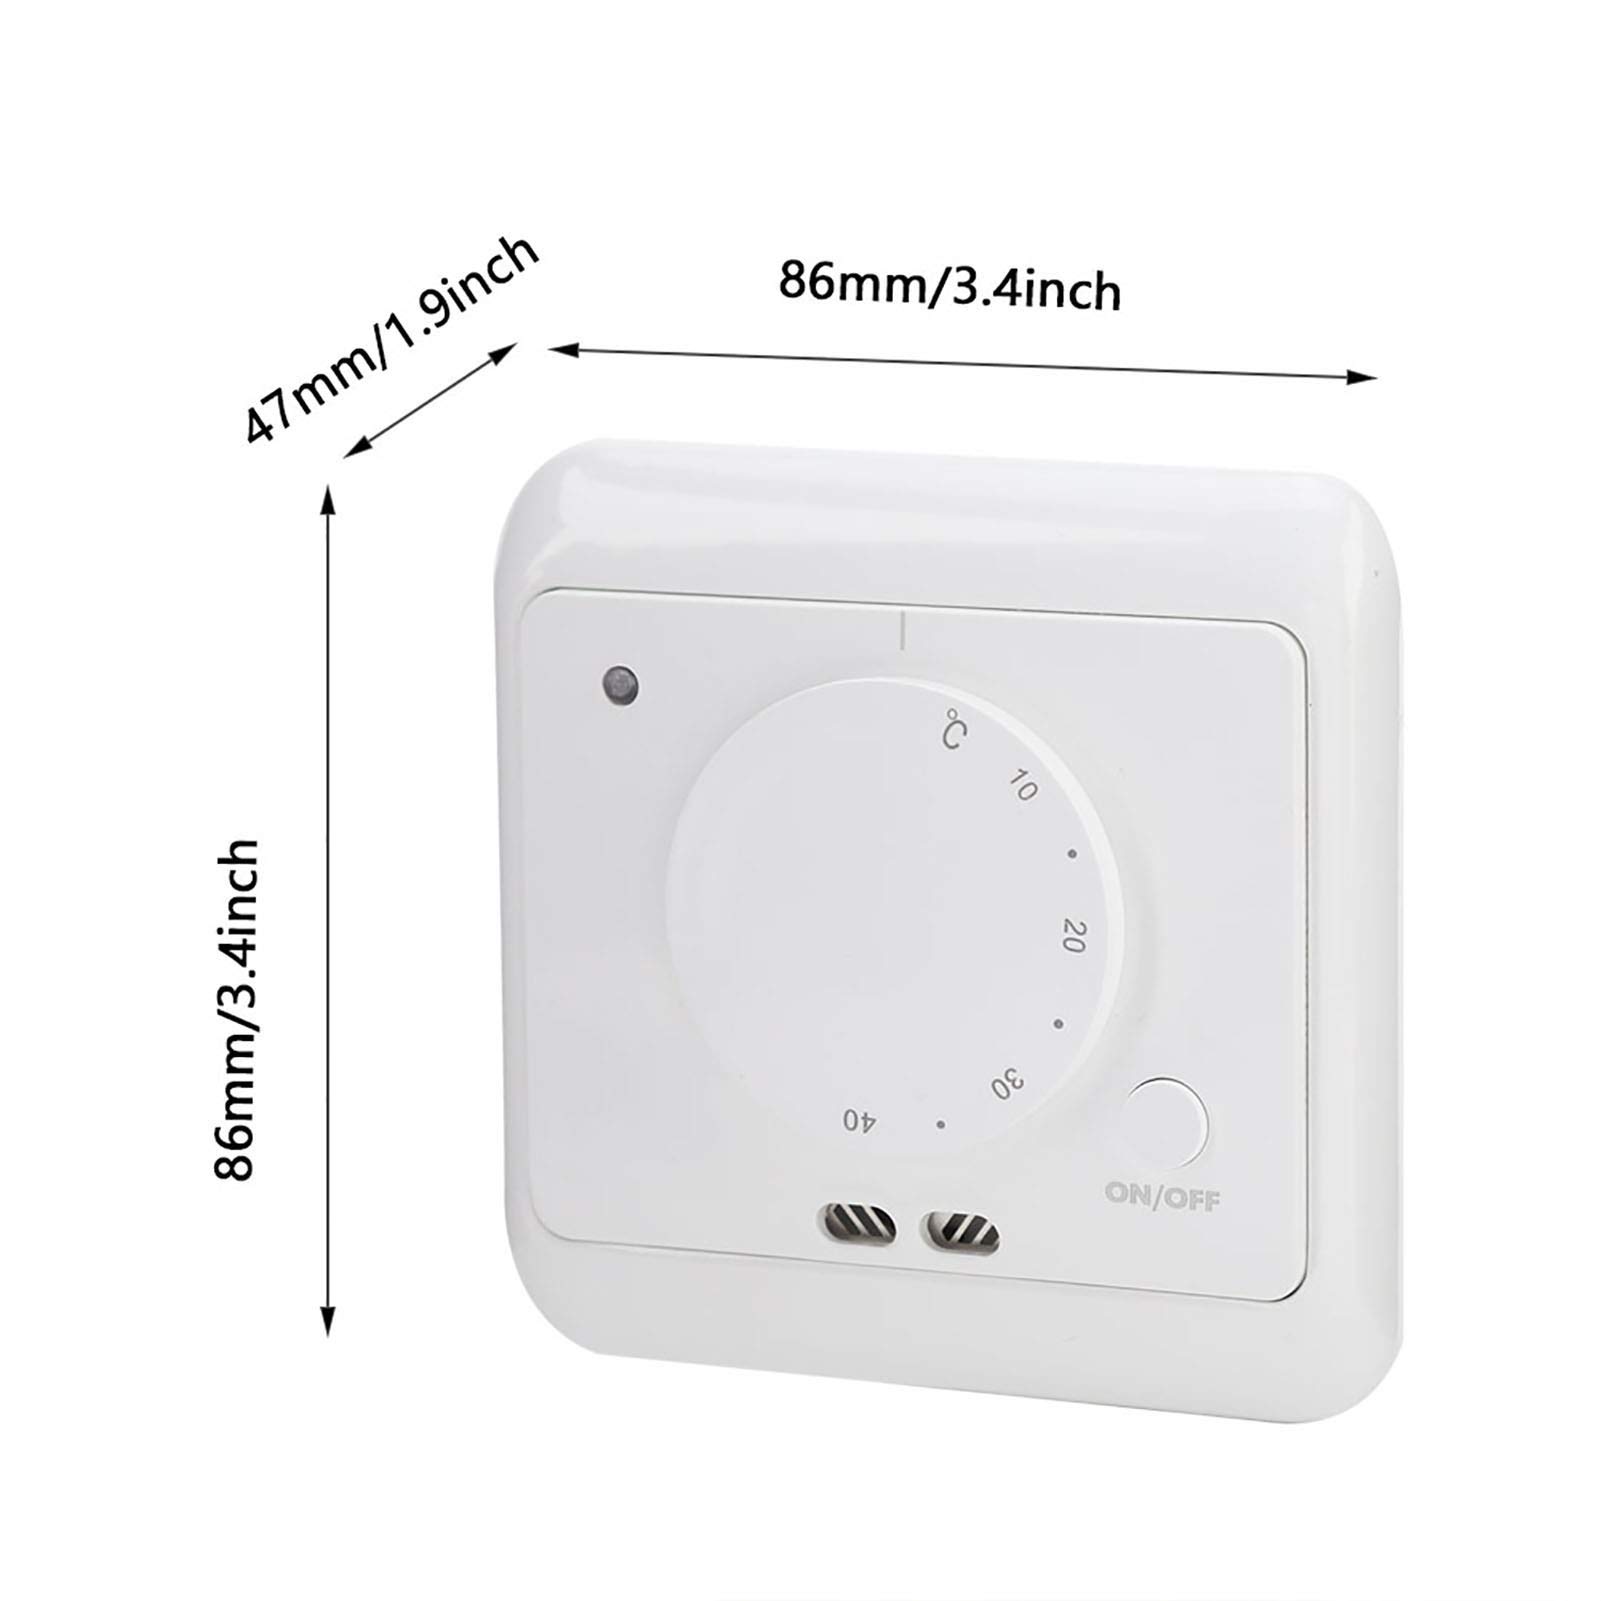 Floor Mechanical Manual Heating Thermostat, Temperature Controller 16A 230V, Wall Baseboard Heater of The Wall Indoors, Home Improvement Heating